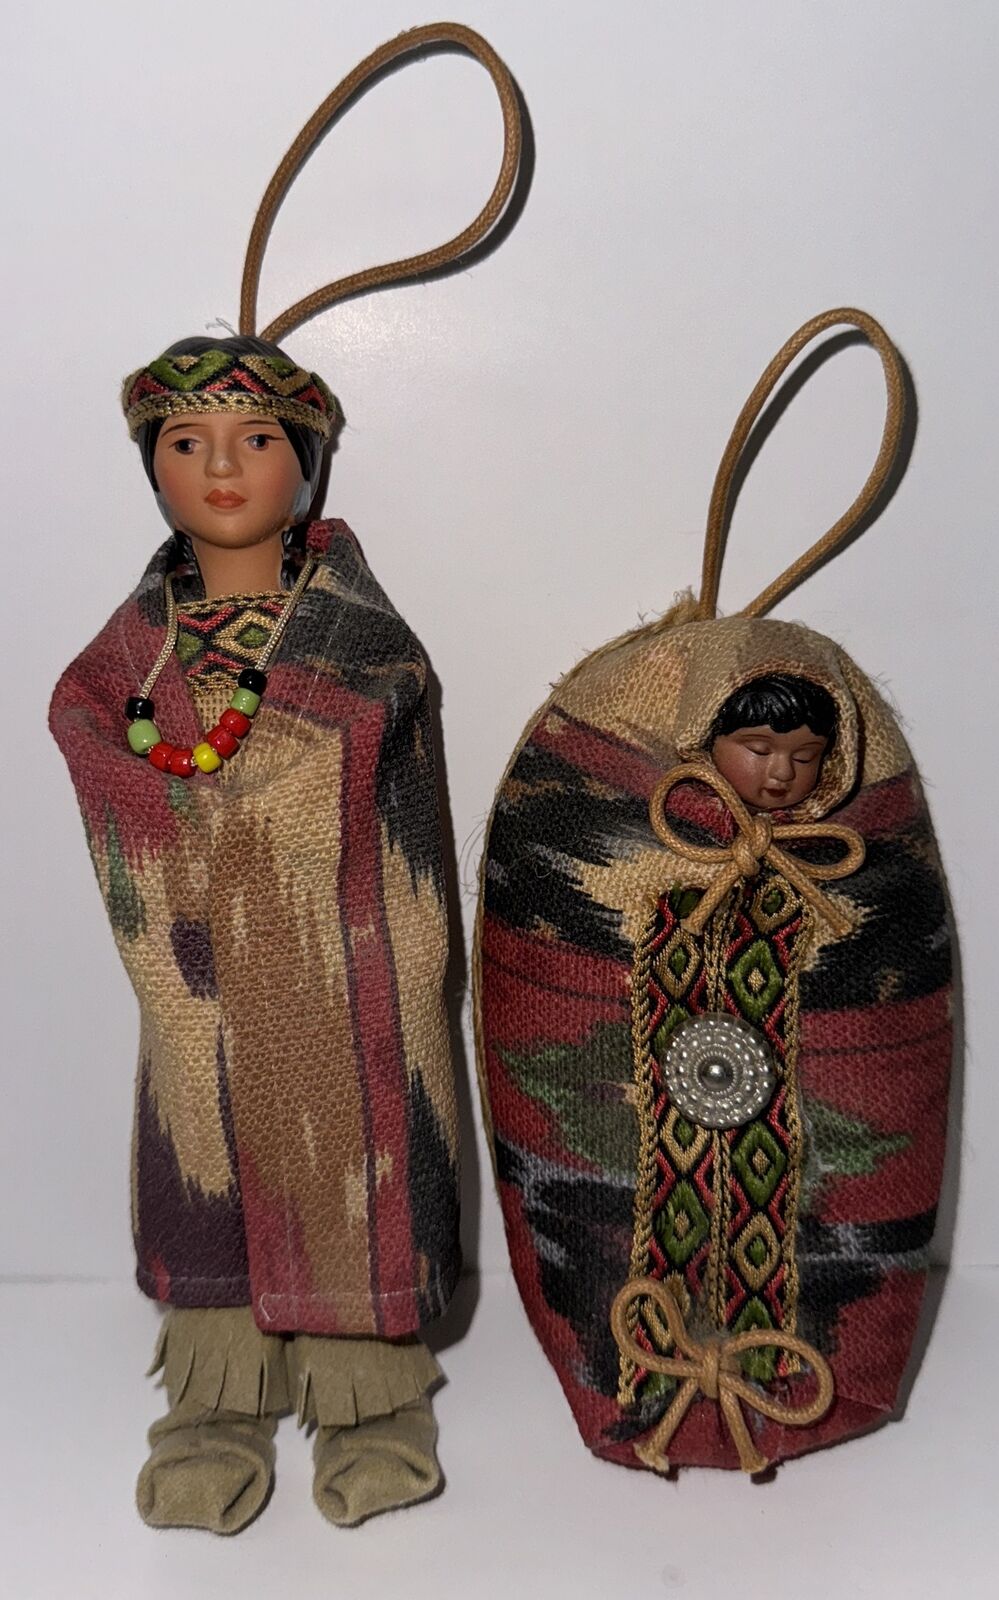 Vintage Native American Indian Papoose Doll Ornament